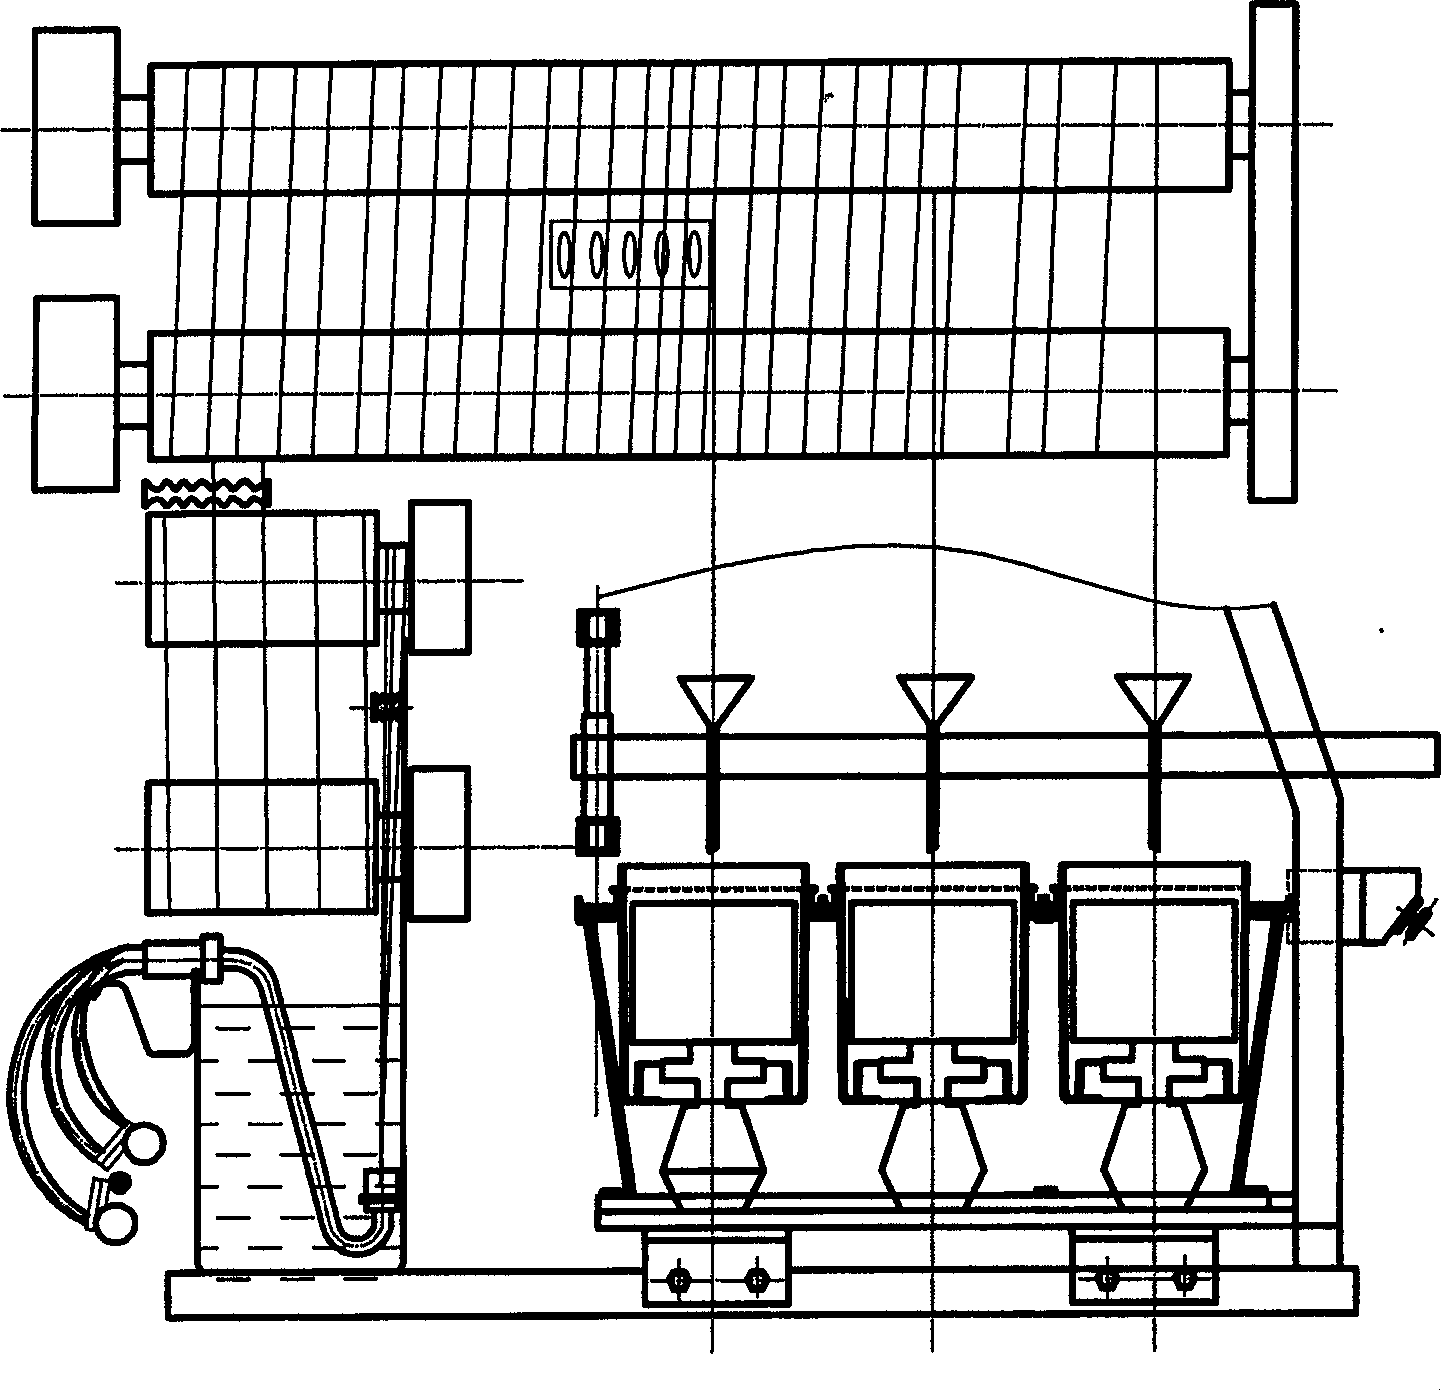 Semi-continuous centrifugal spinning process